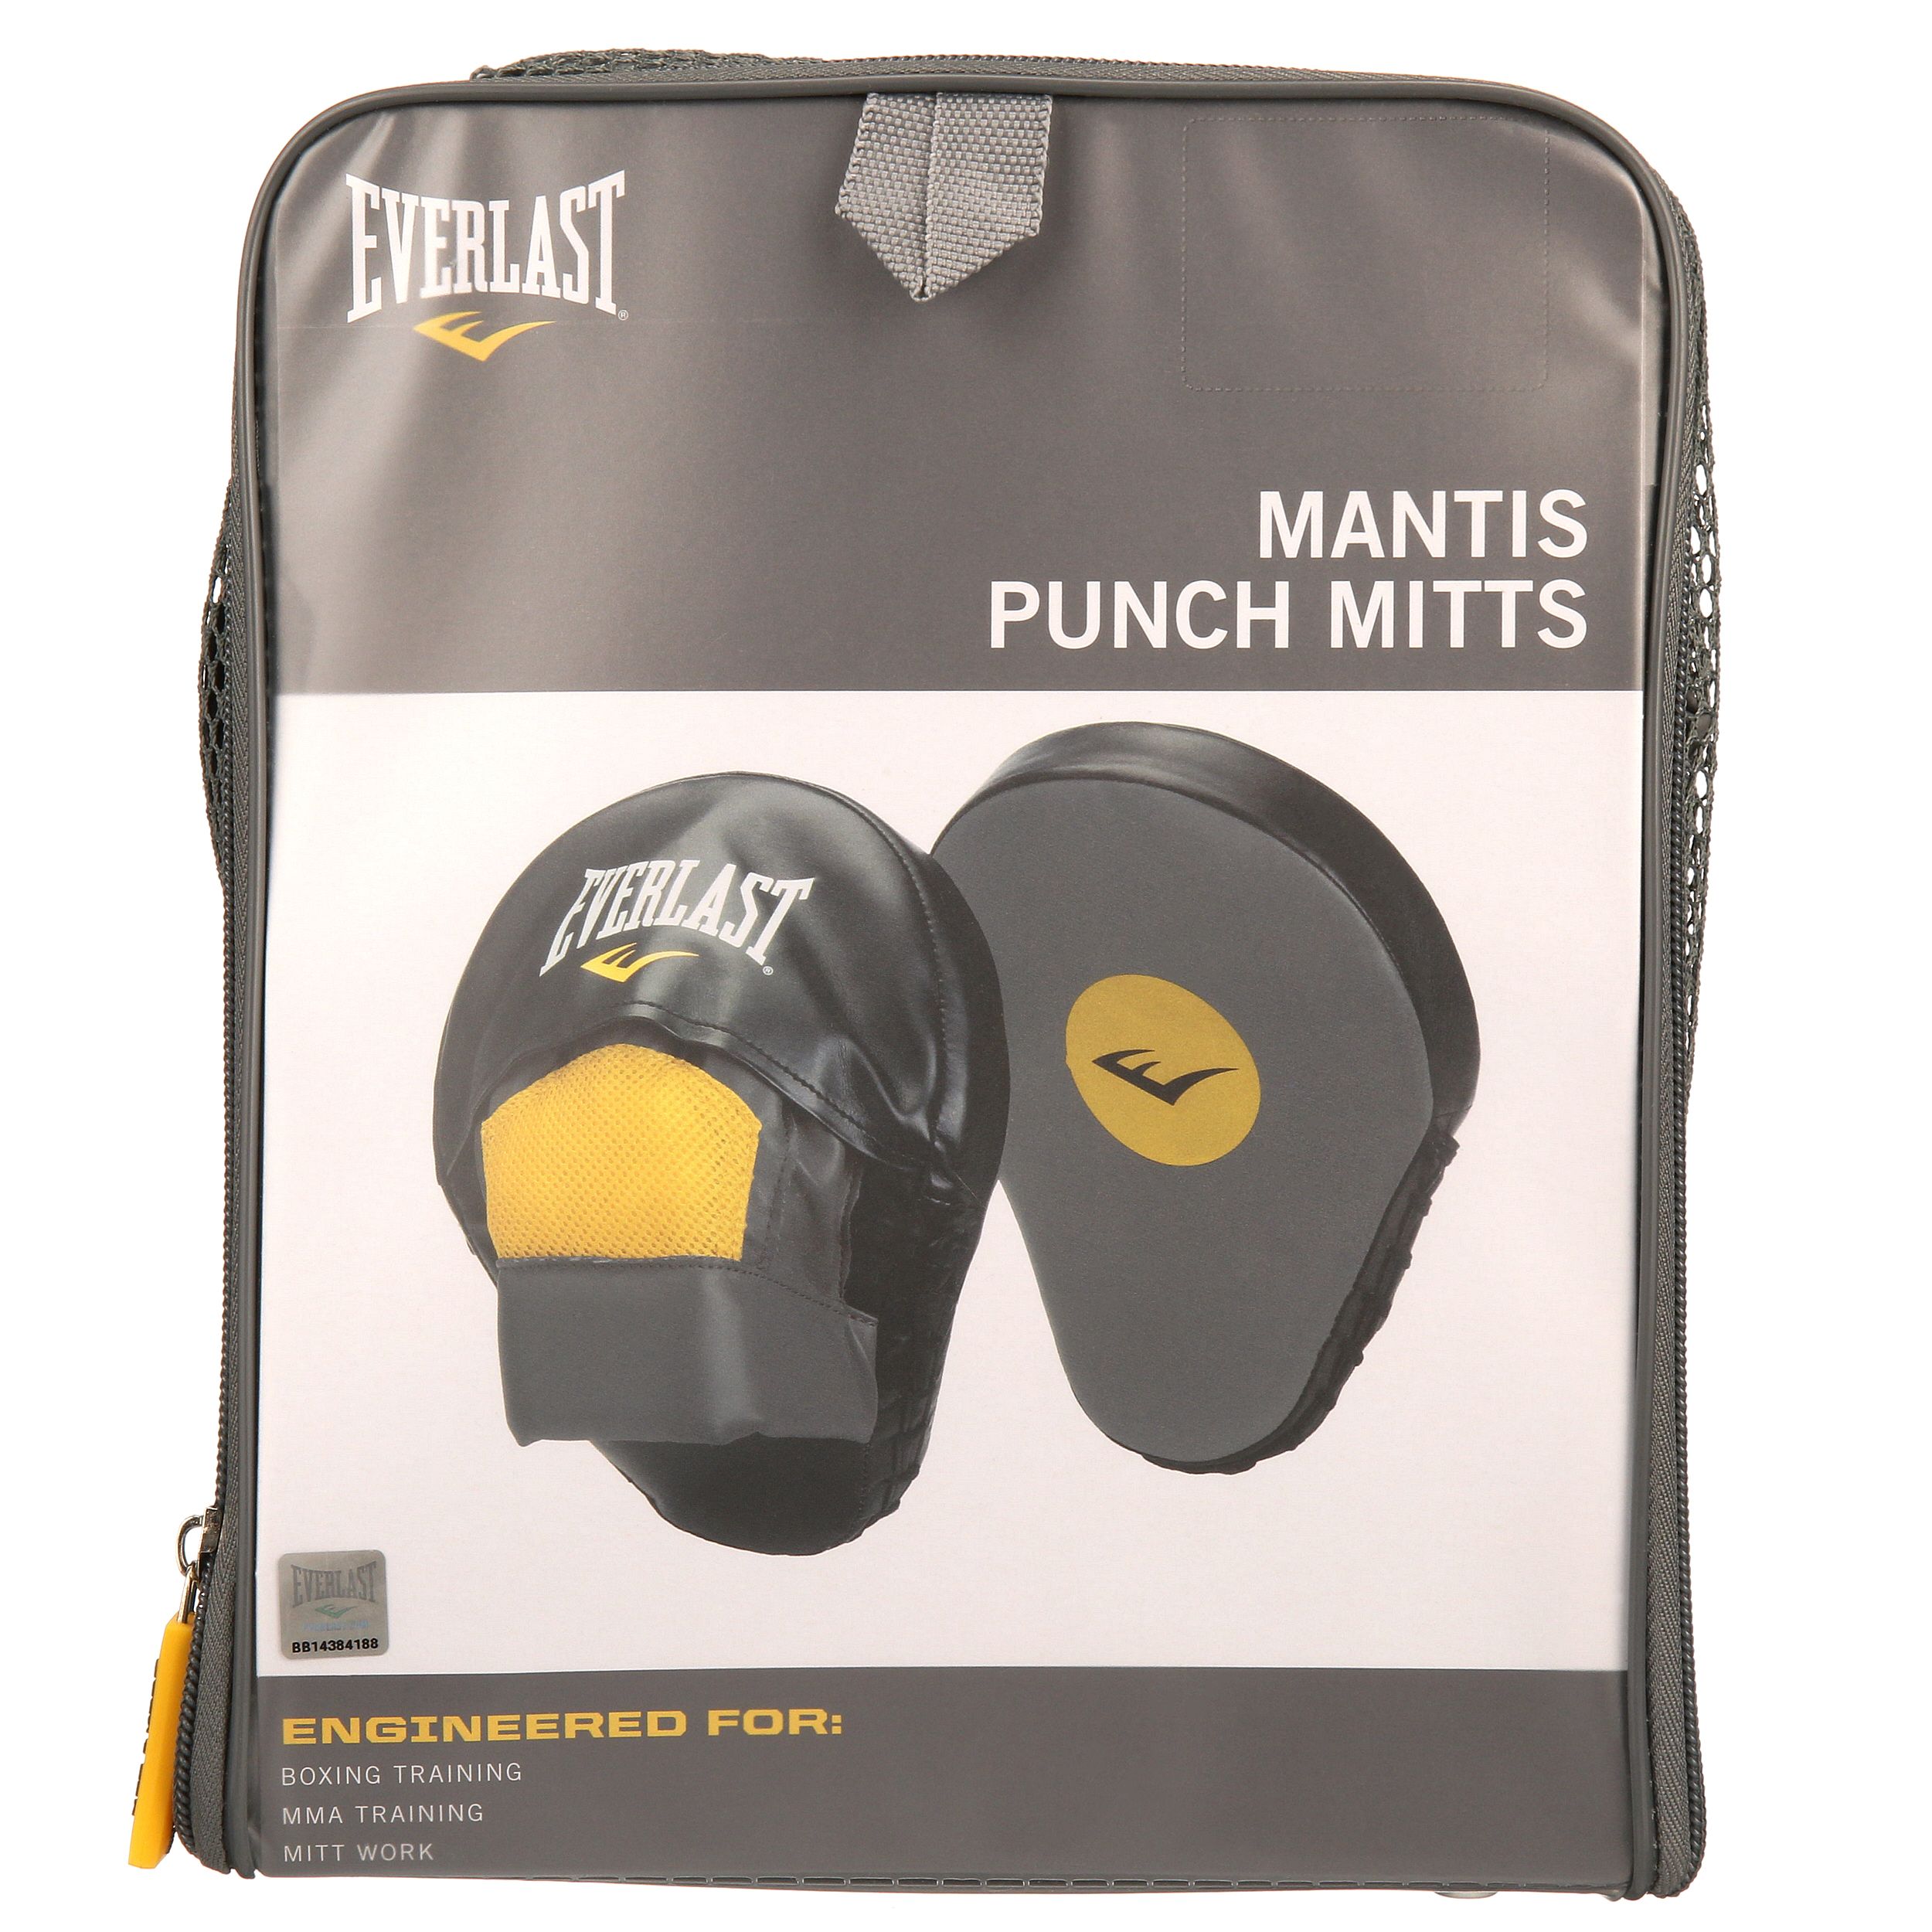 Everlast Mantis Punch Mitts, One Size - image 2 of 6